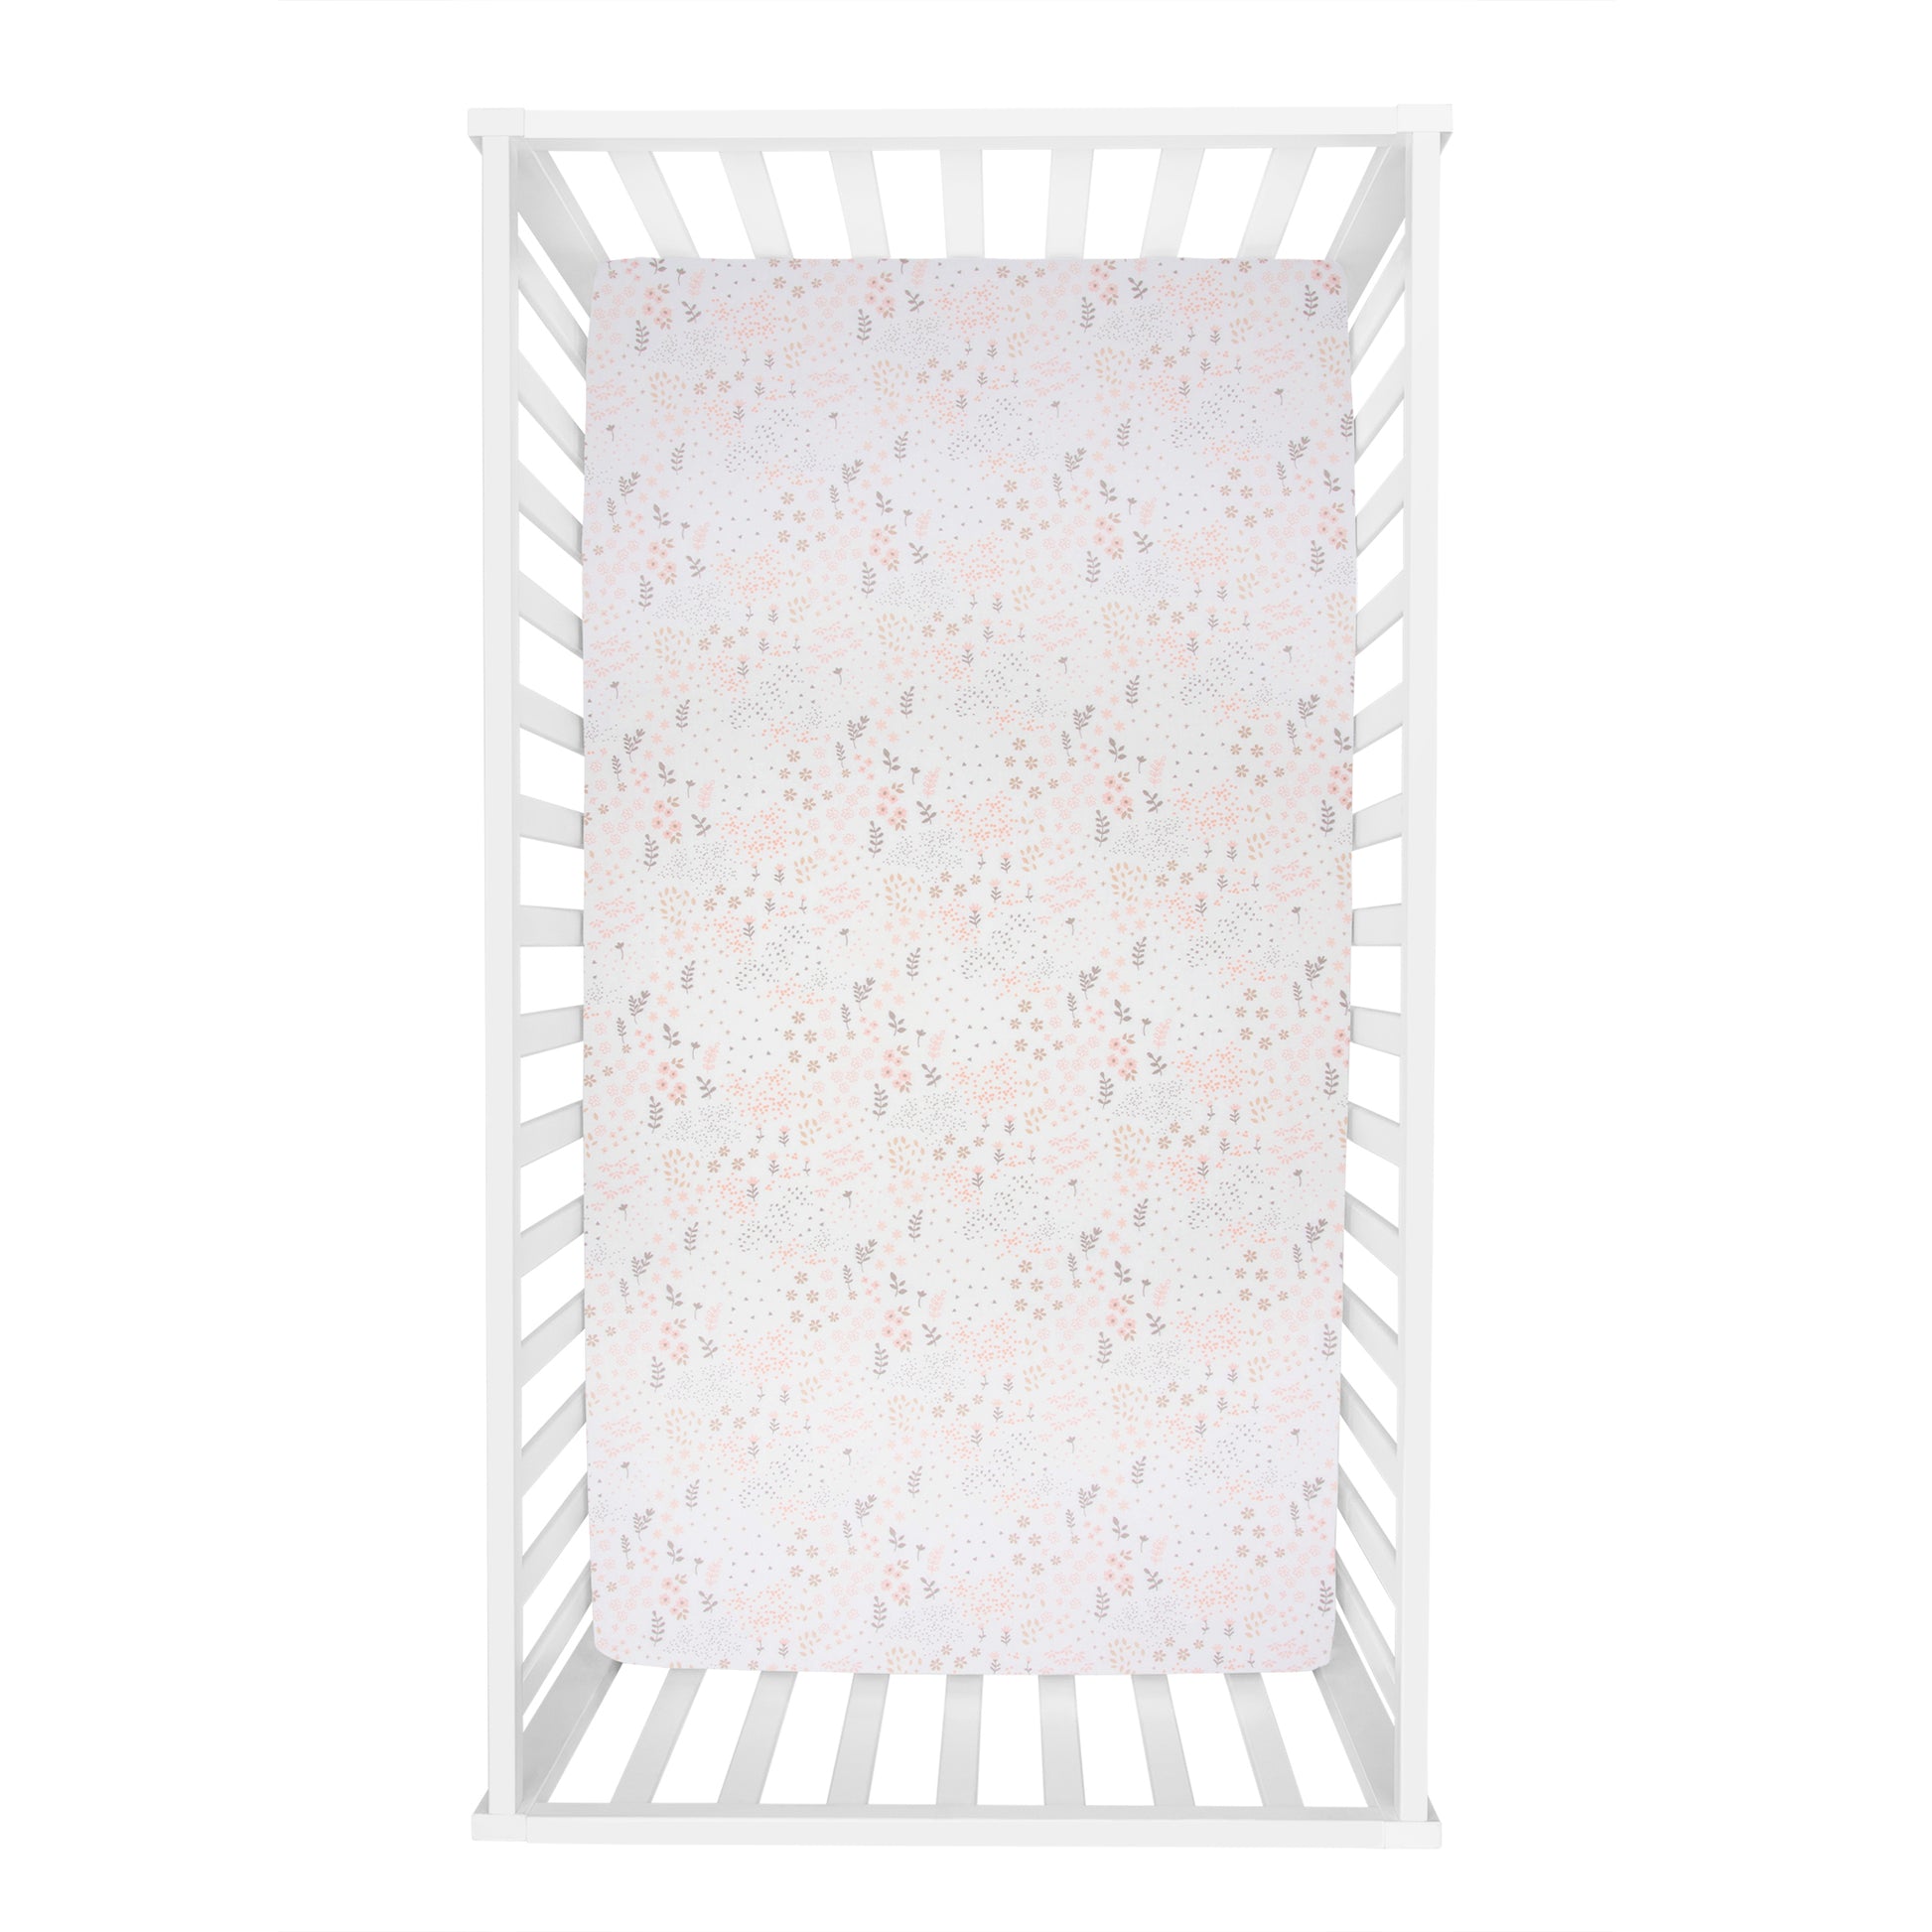 Blush Floral Fitted Crib Sheet - overhead view